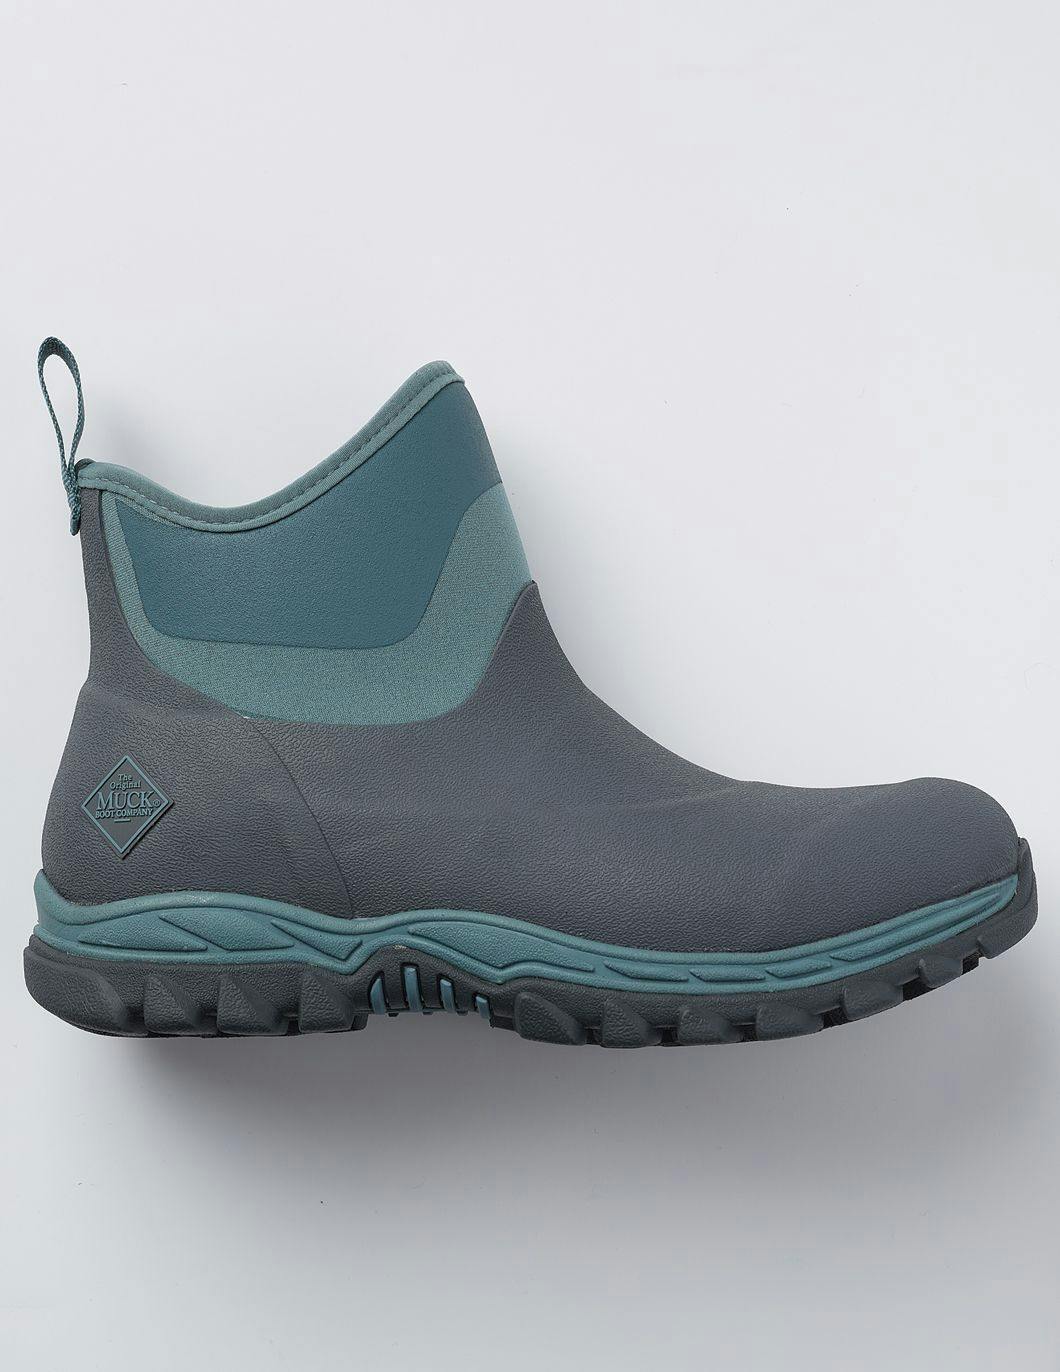 muck-womens-arctic-sport-ankle-boot-grey-side